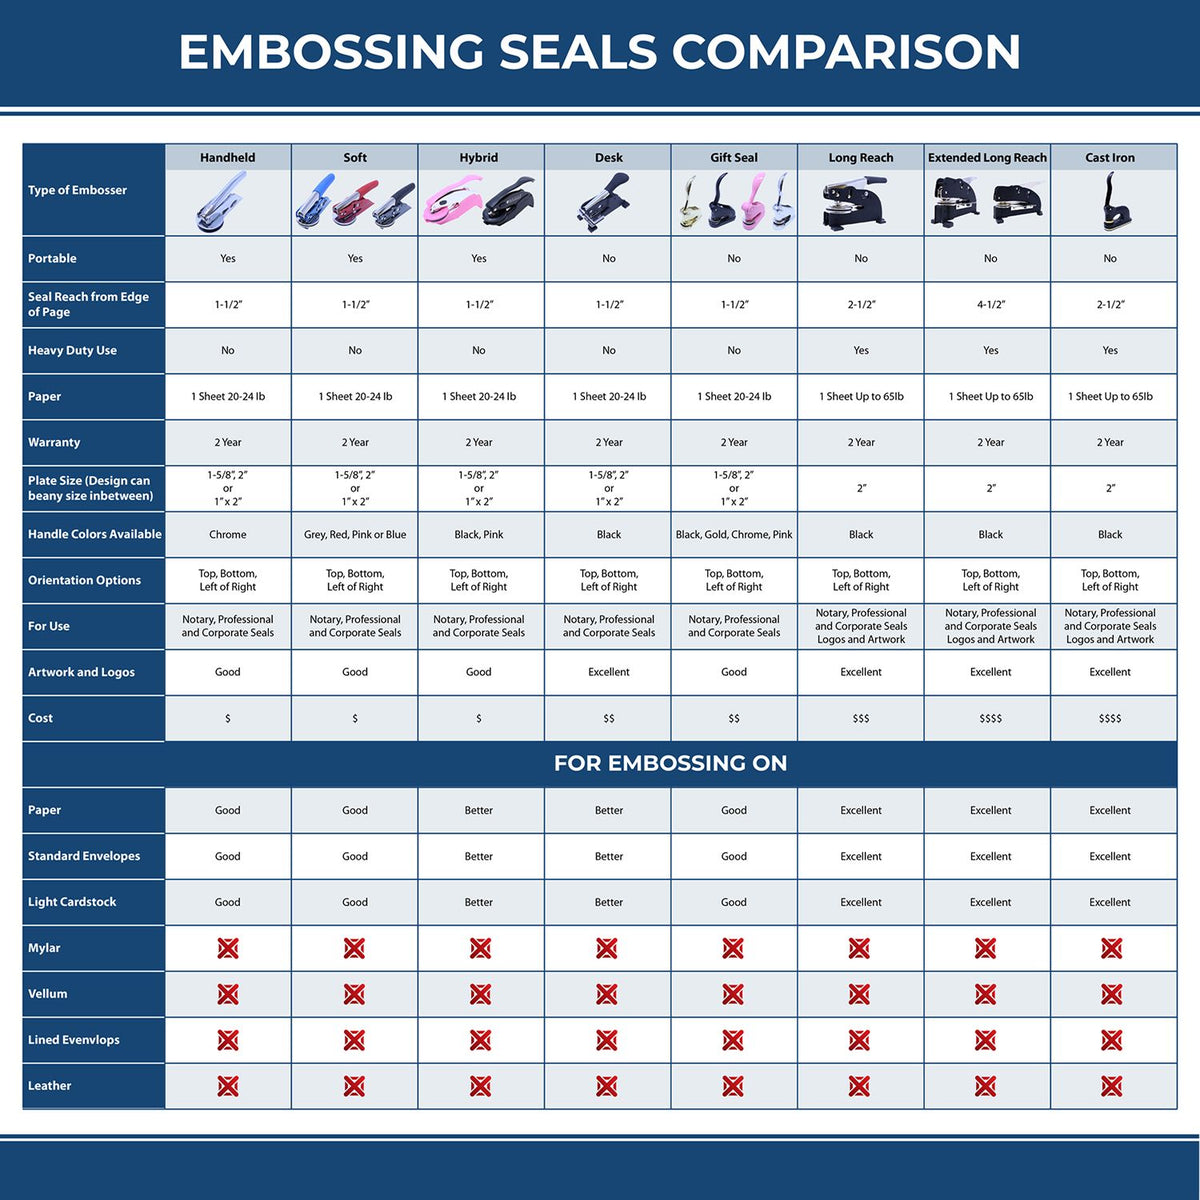 A comparison chart for the different types of mount models available for the State of New Jersey Extended Long Reach Geologist Seal